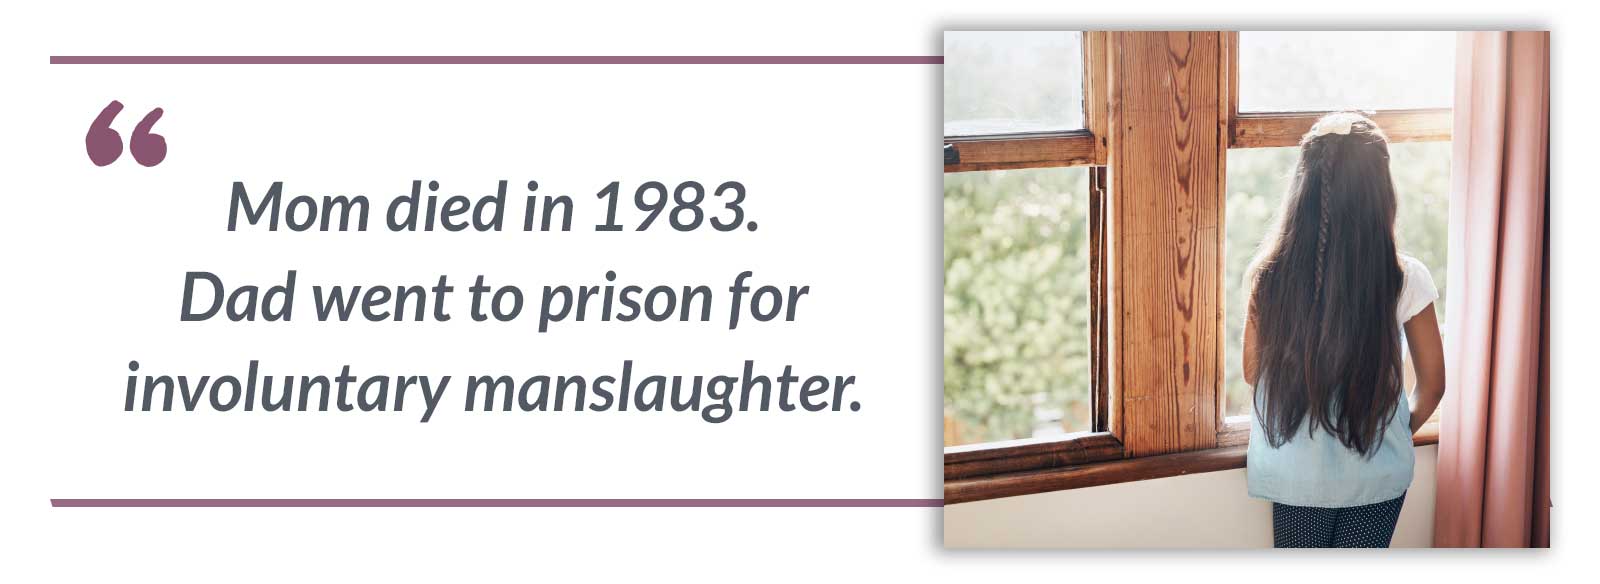 Mom died in 1983. Dad went to prison for involuntary manslaughter.-Maria